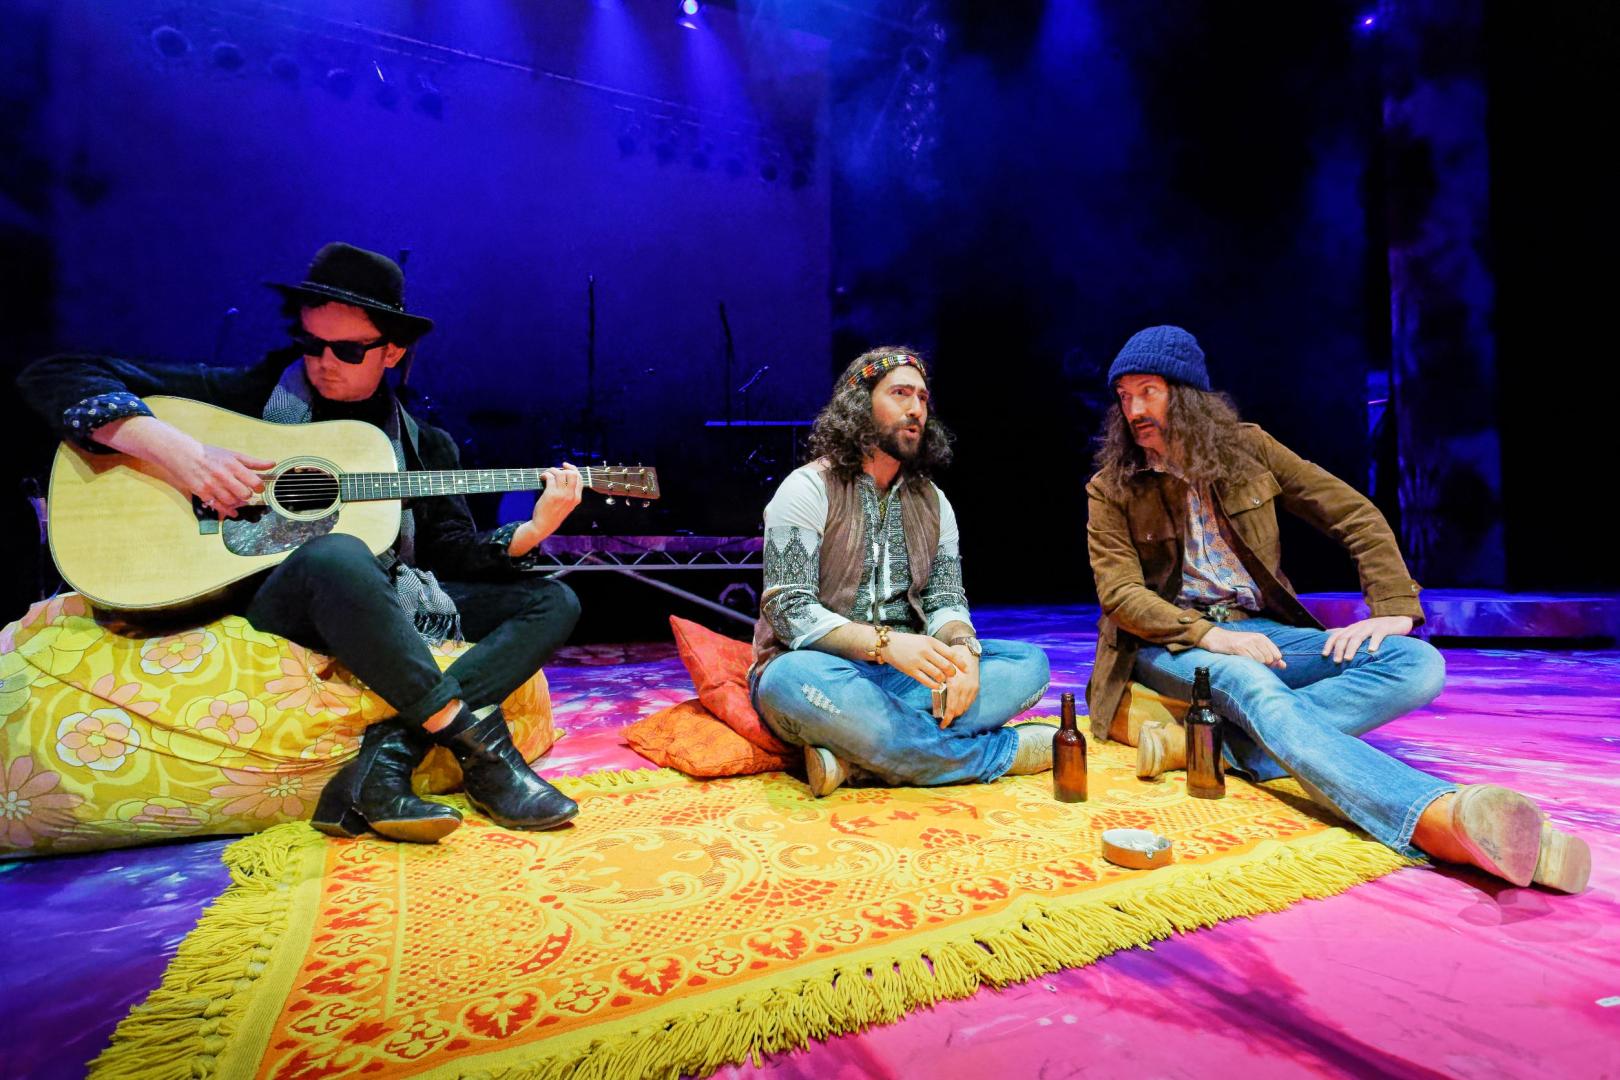 hippies sat on yellow rug chatting